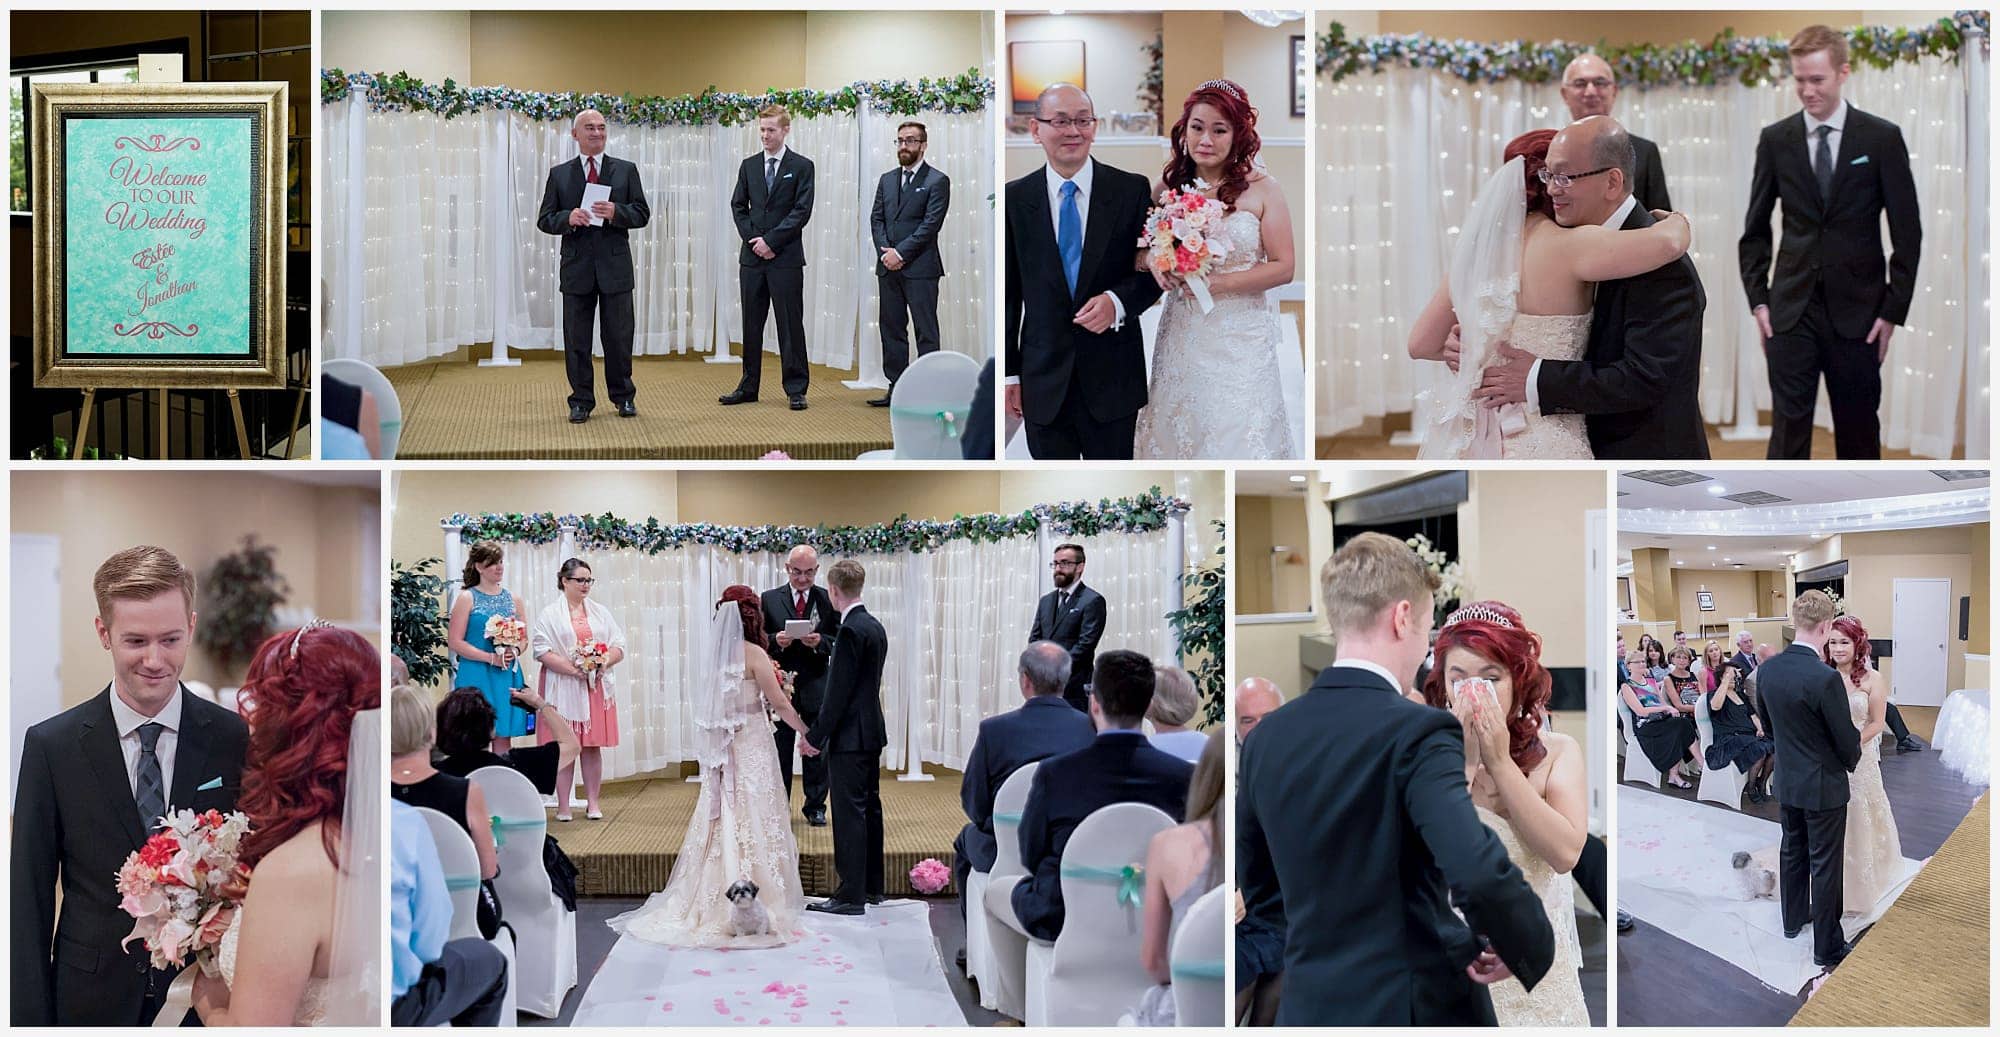 The Wedding ceremony of a bride and groom at the Atlantica Hotel in Halifax.